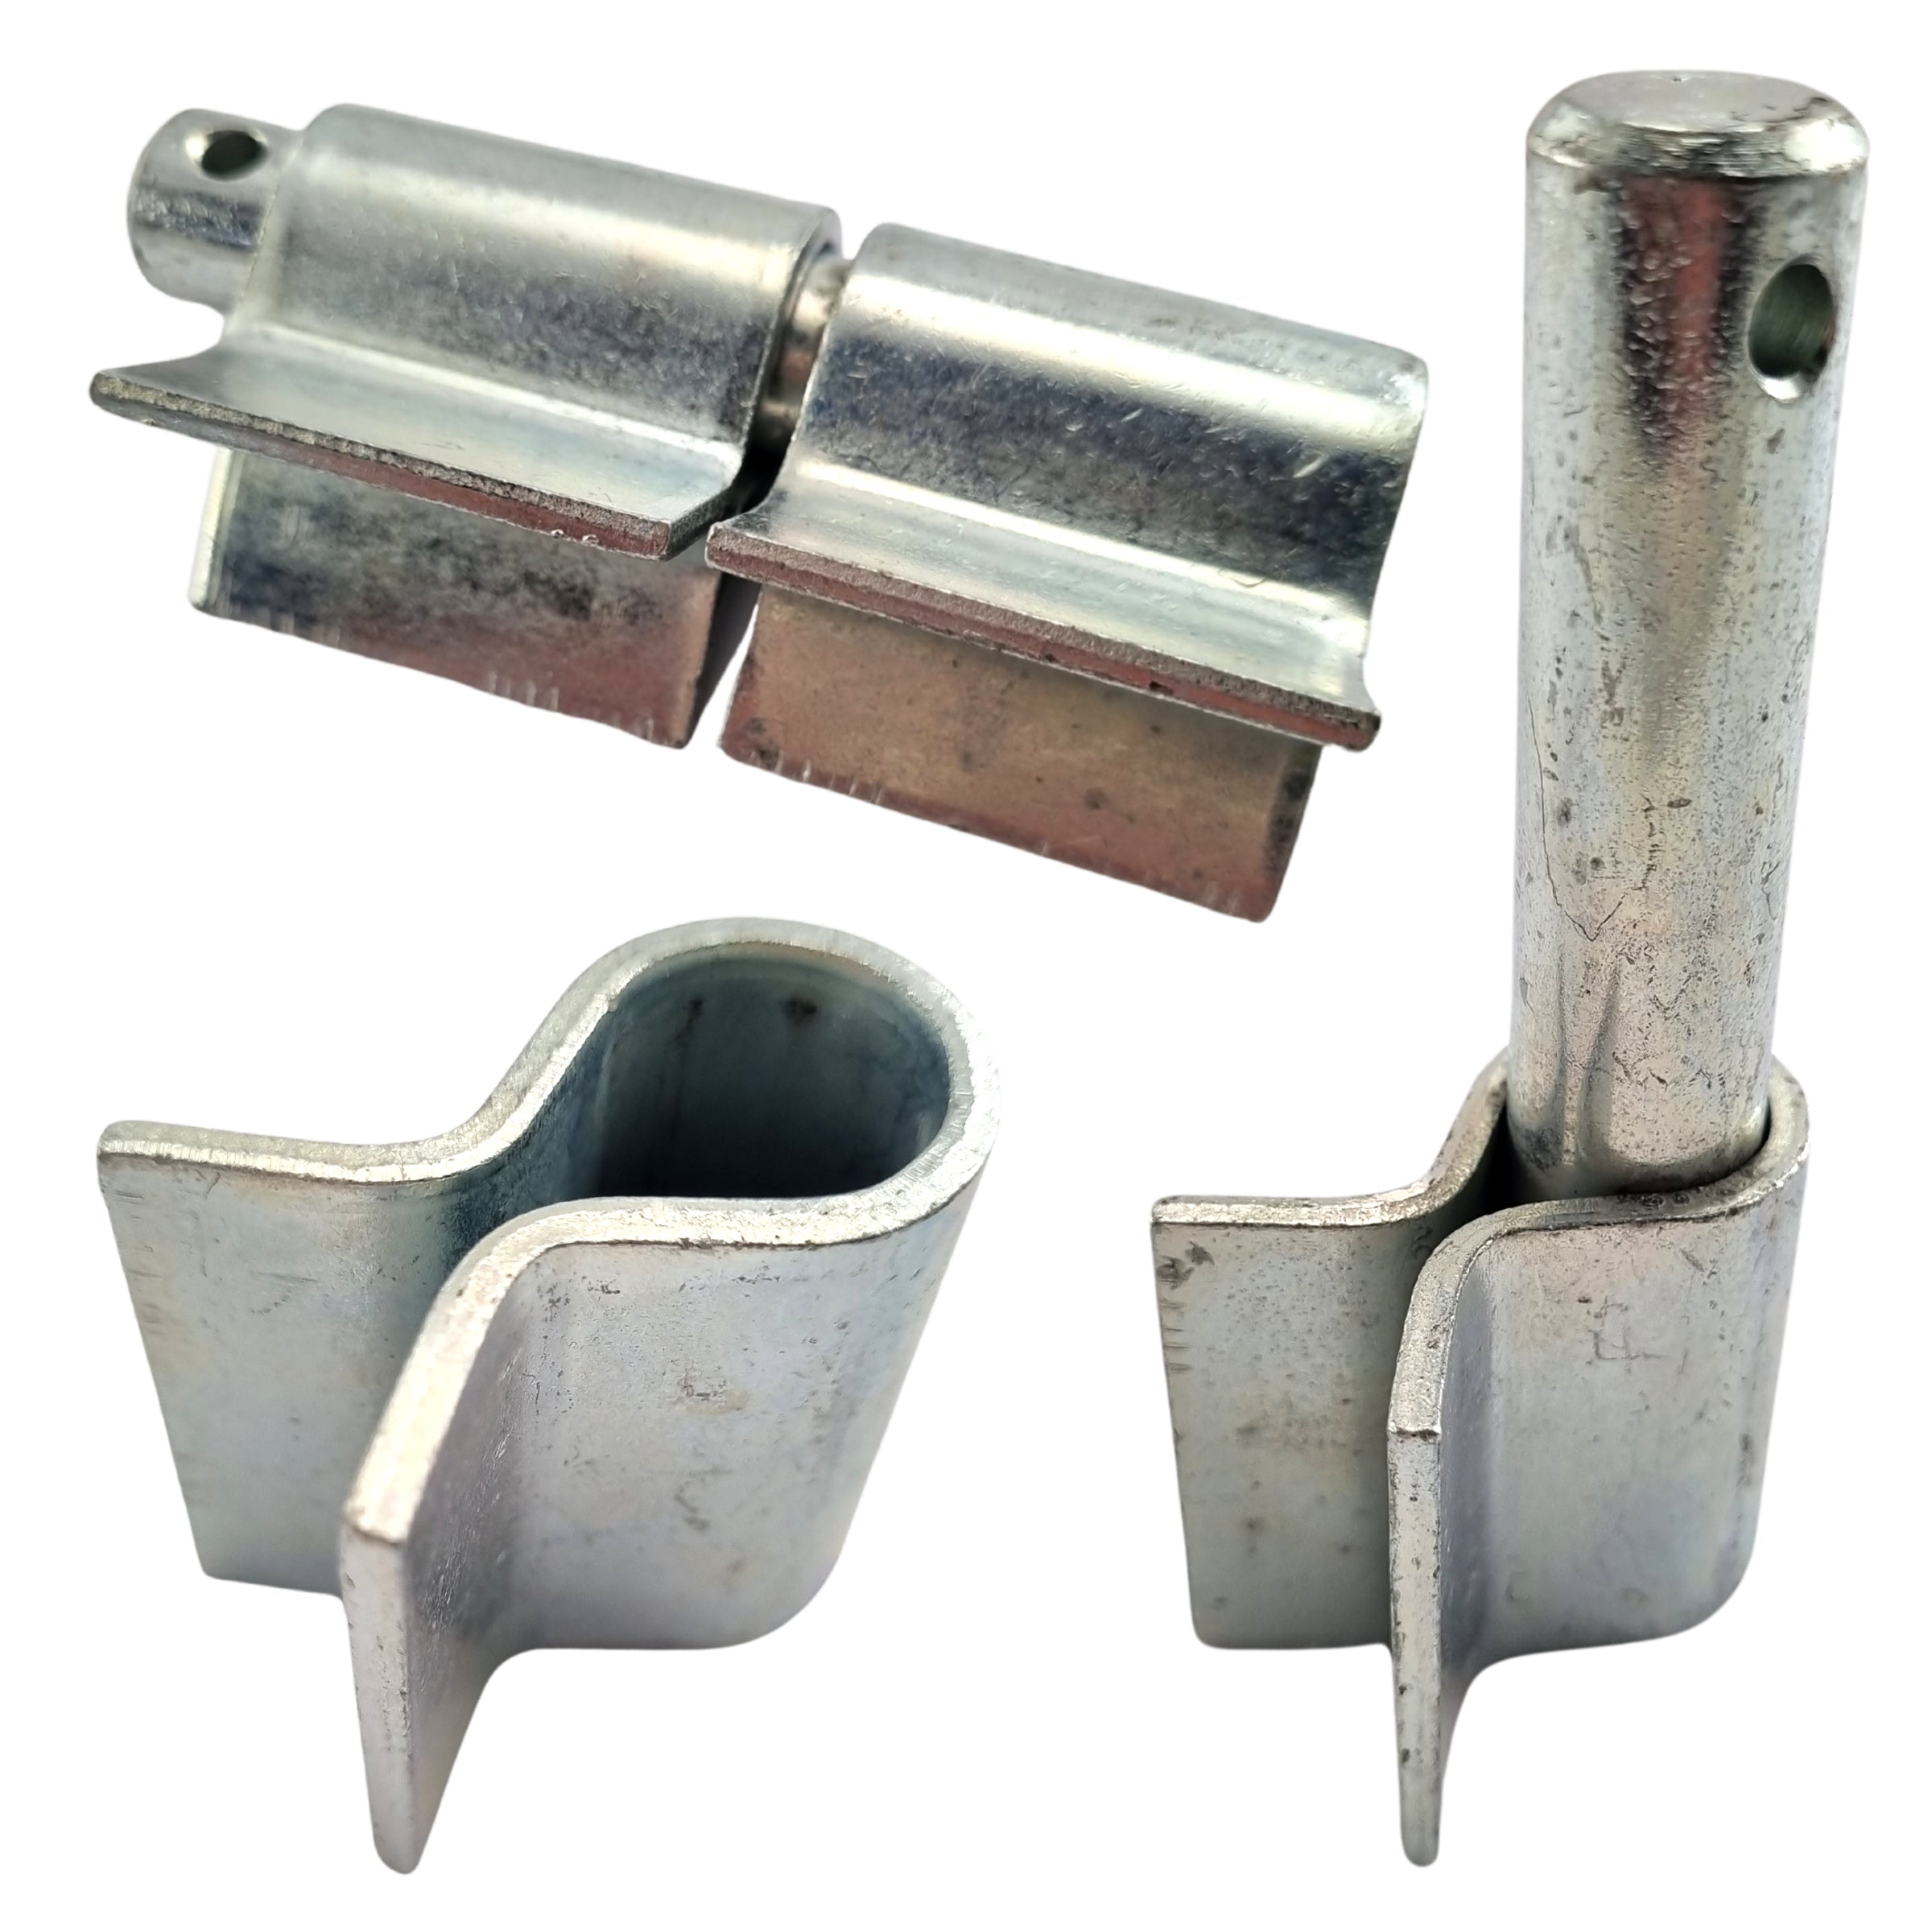 Weld On Fittings. Australia wide shipping.